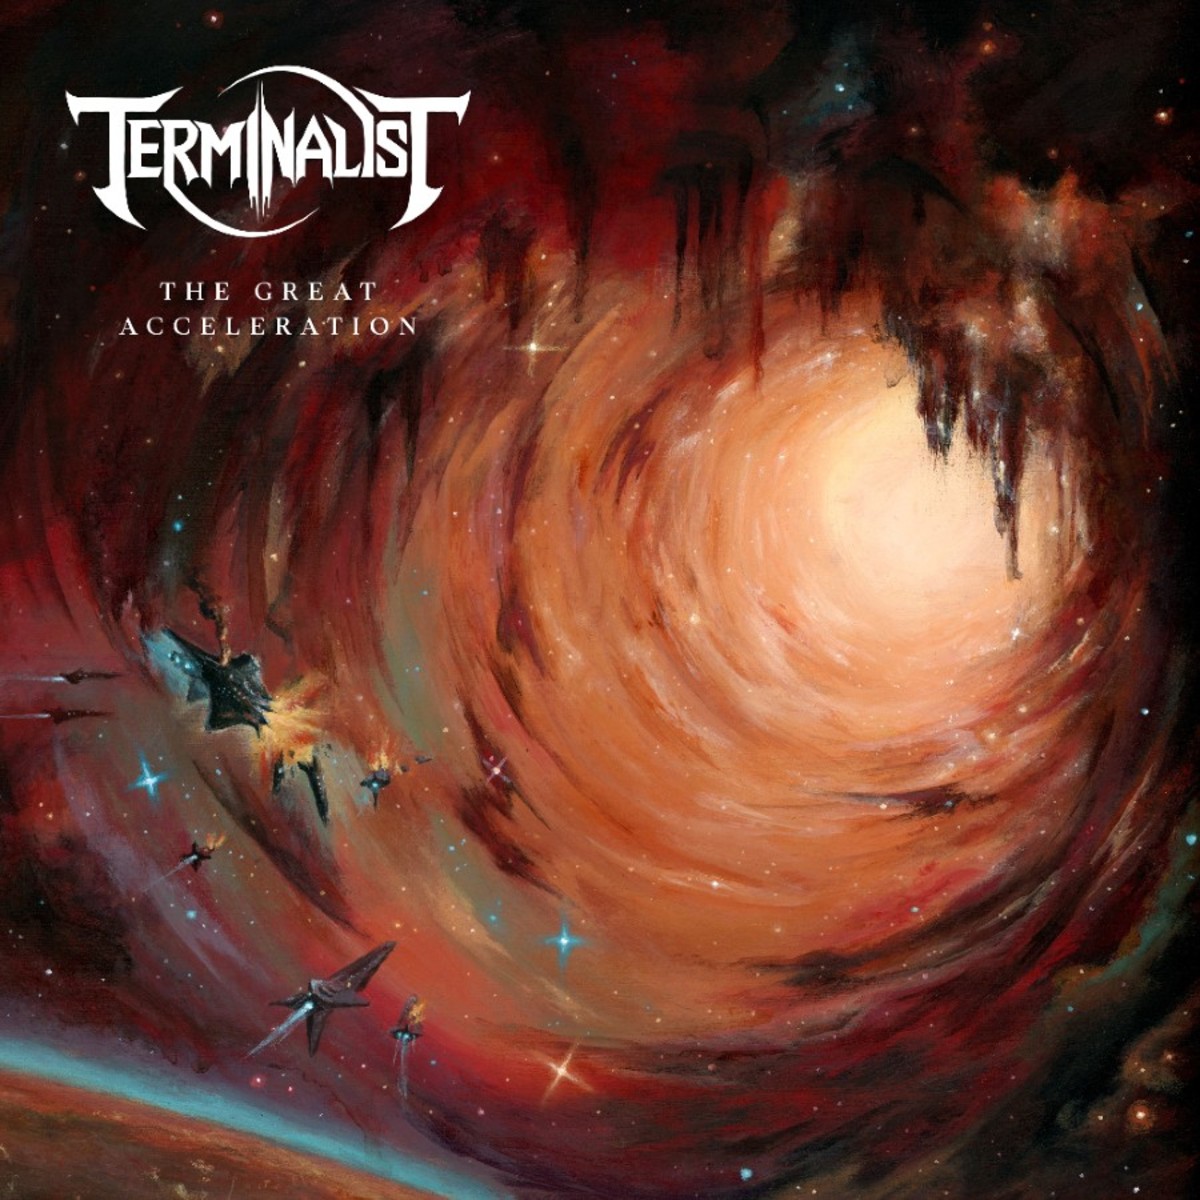 a-review-of-the-album-the-great-acceleration-by-danish-death-and-thrash-metal-band-terminalist